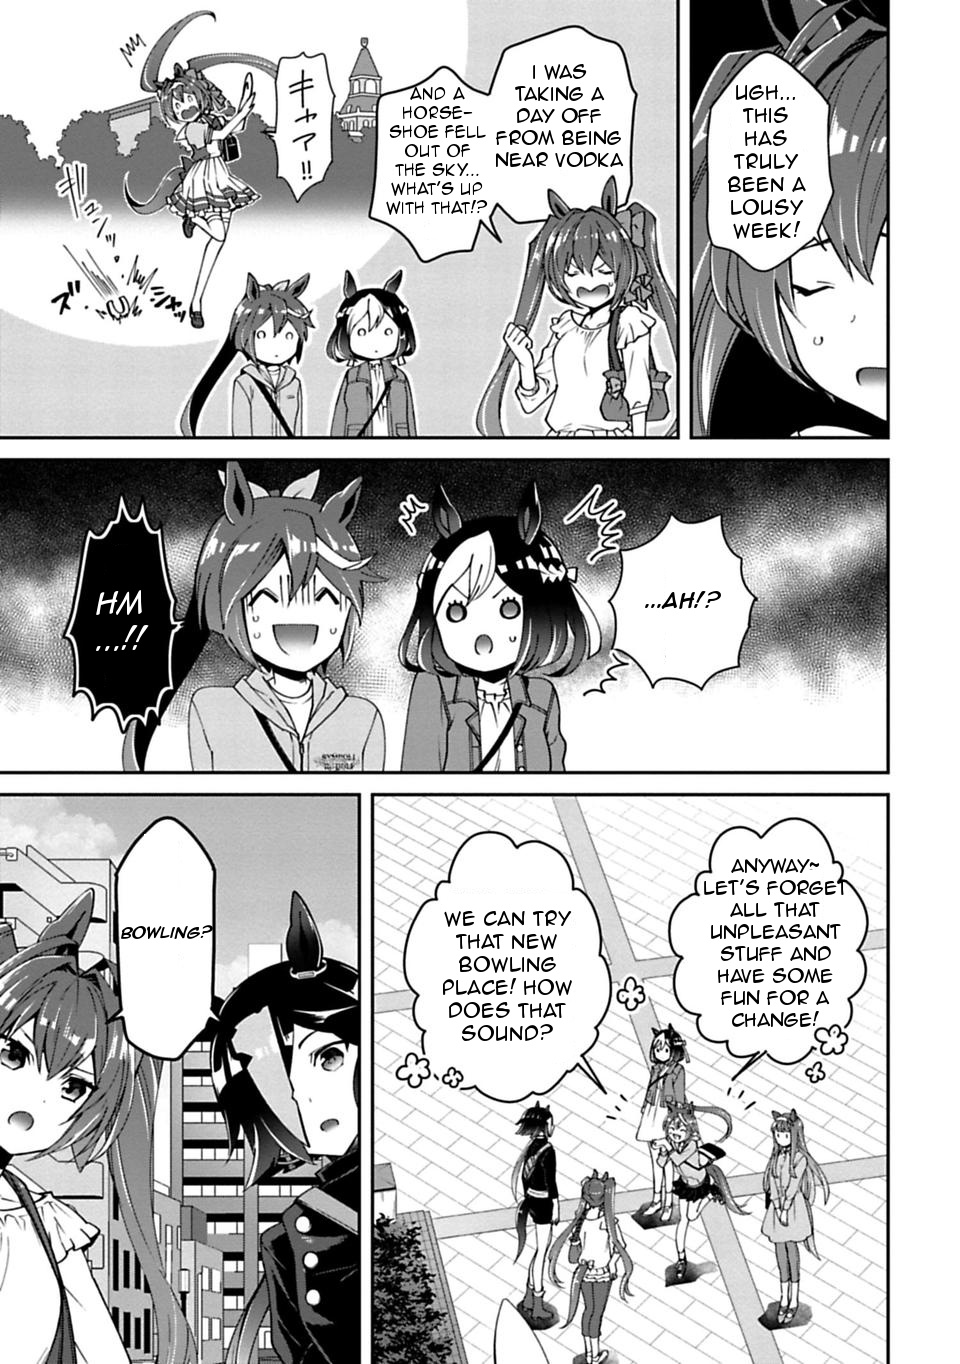 Starting Gate! Uma Musume Pretty Derby Vol.2 Chapter 9: Rivals 3 - Picture 3